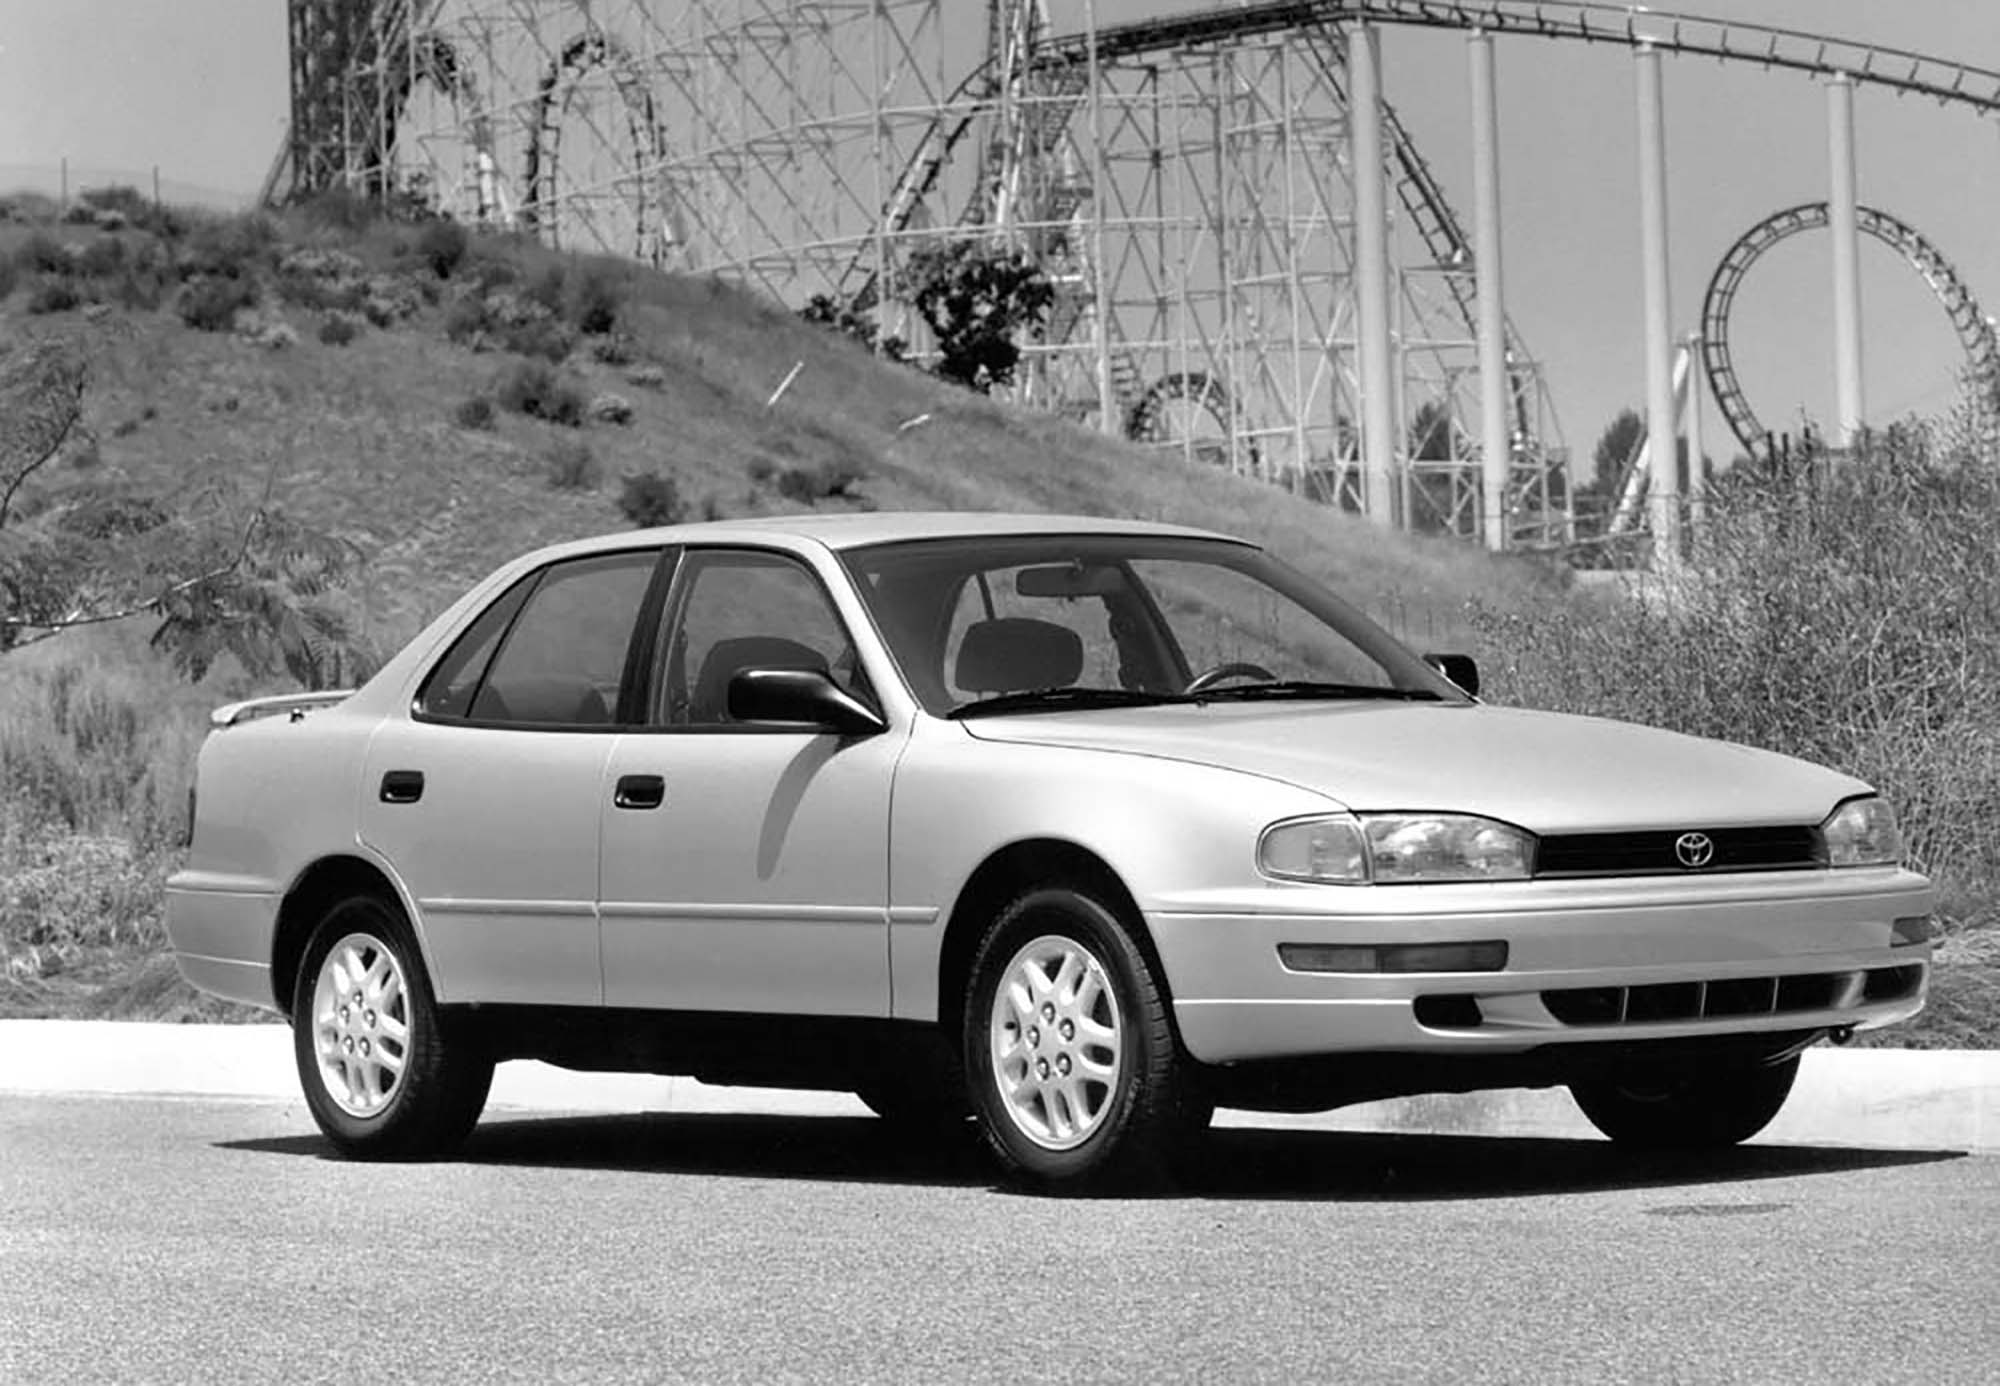 1993 Toyota Camry parked in front of a roller coaster.